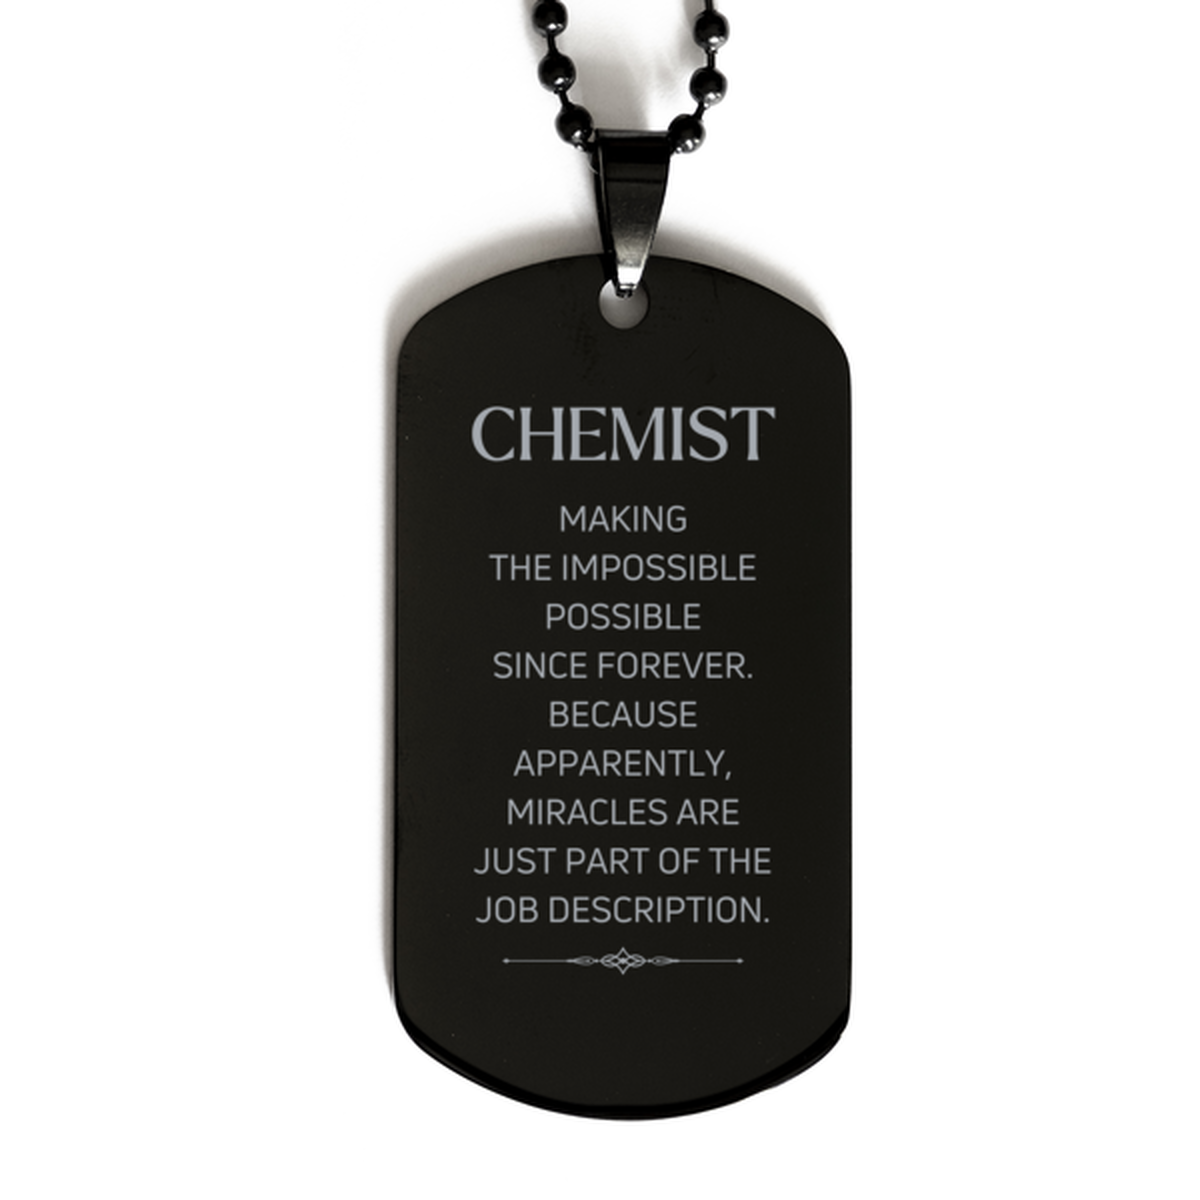 Funny Chemist Gifts, Miracles are just part of the job description, Inspirational Birthday Black Dog Tag For Chemist, Men, Women, Coworkers, Friends, Boss